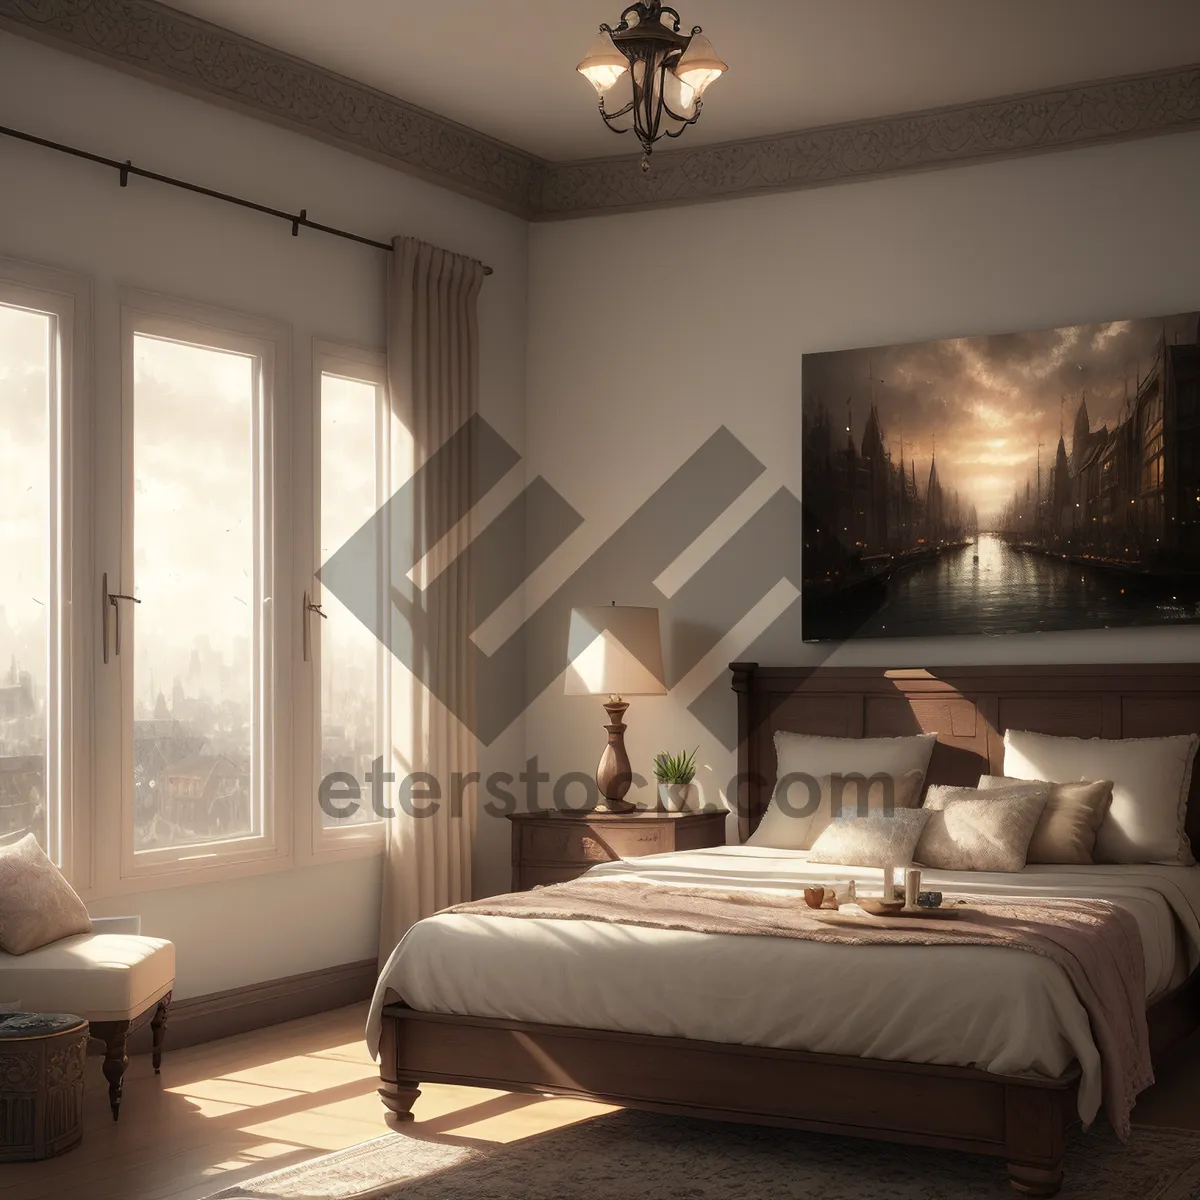 Picture of Modern Bedroom Interior with Comfortable Furniture and Stylish Décor